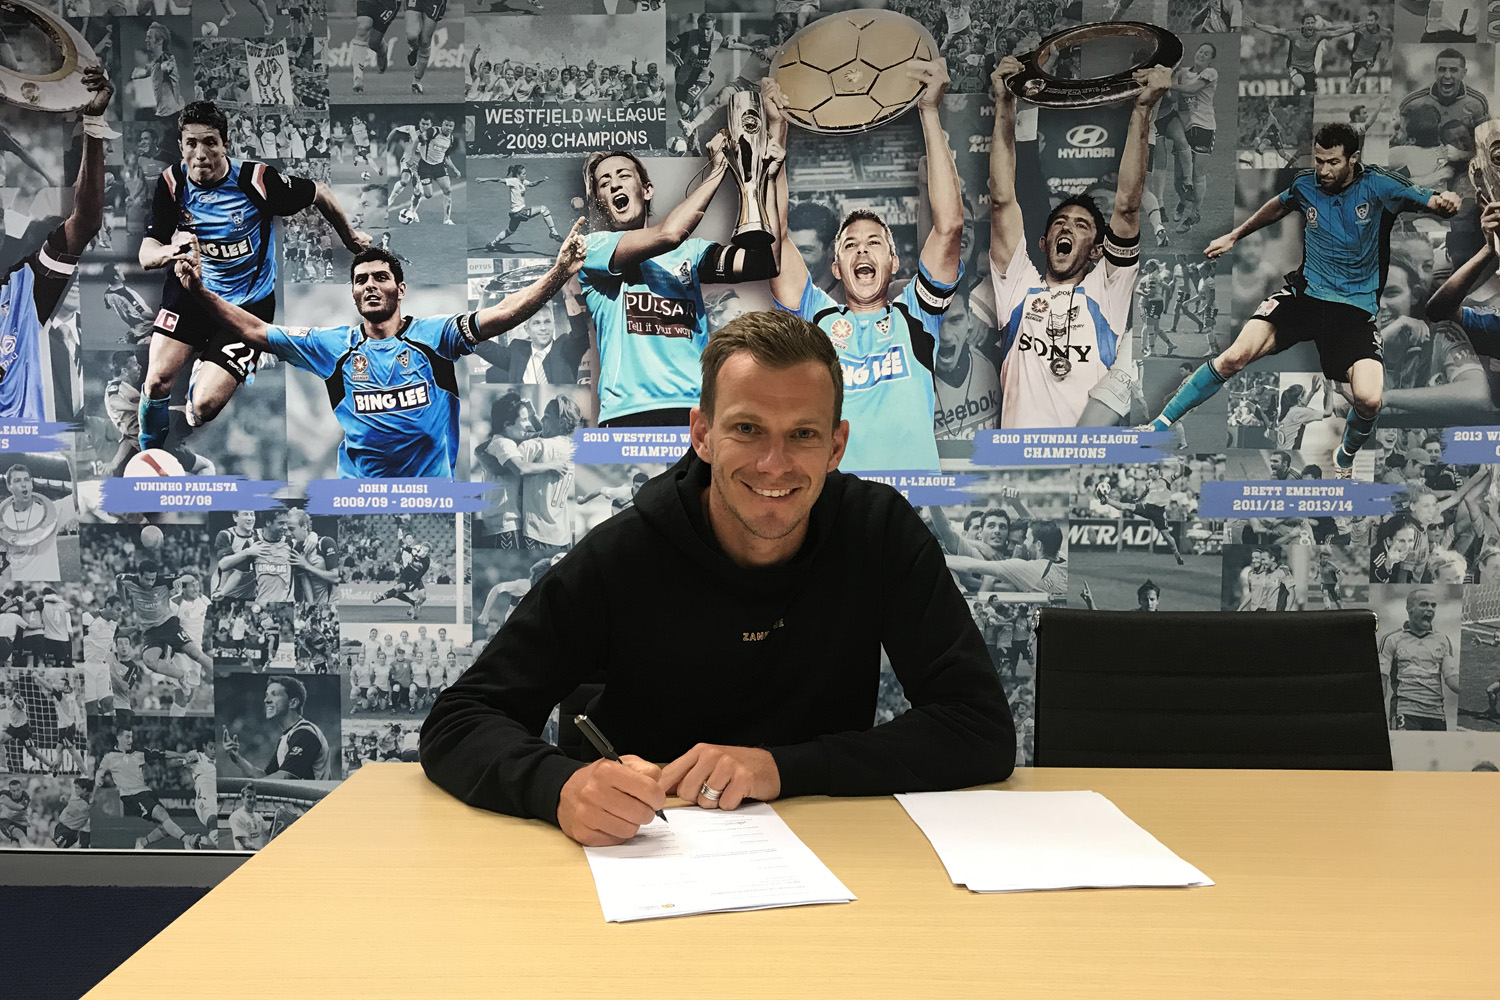 Alex Wilkinson Signs His New 2 Year Deal